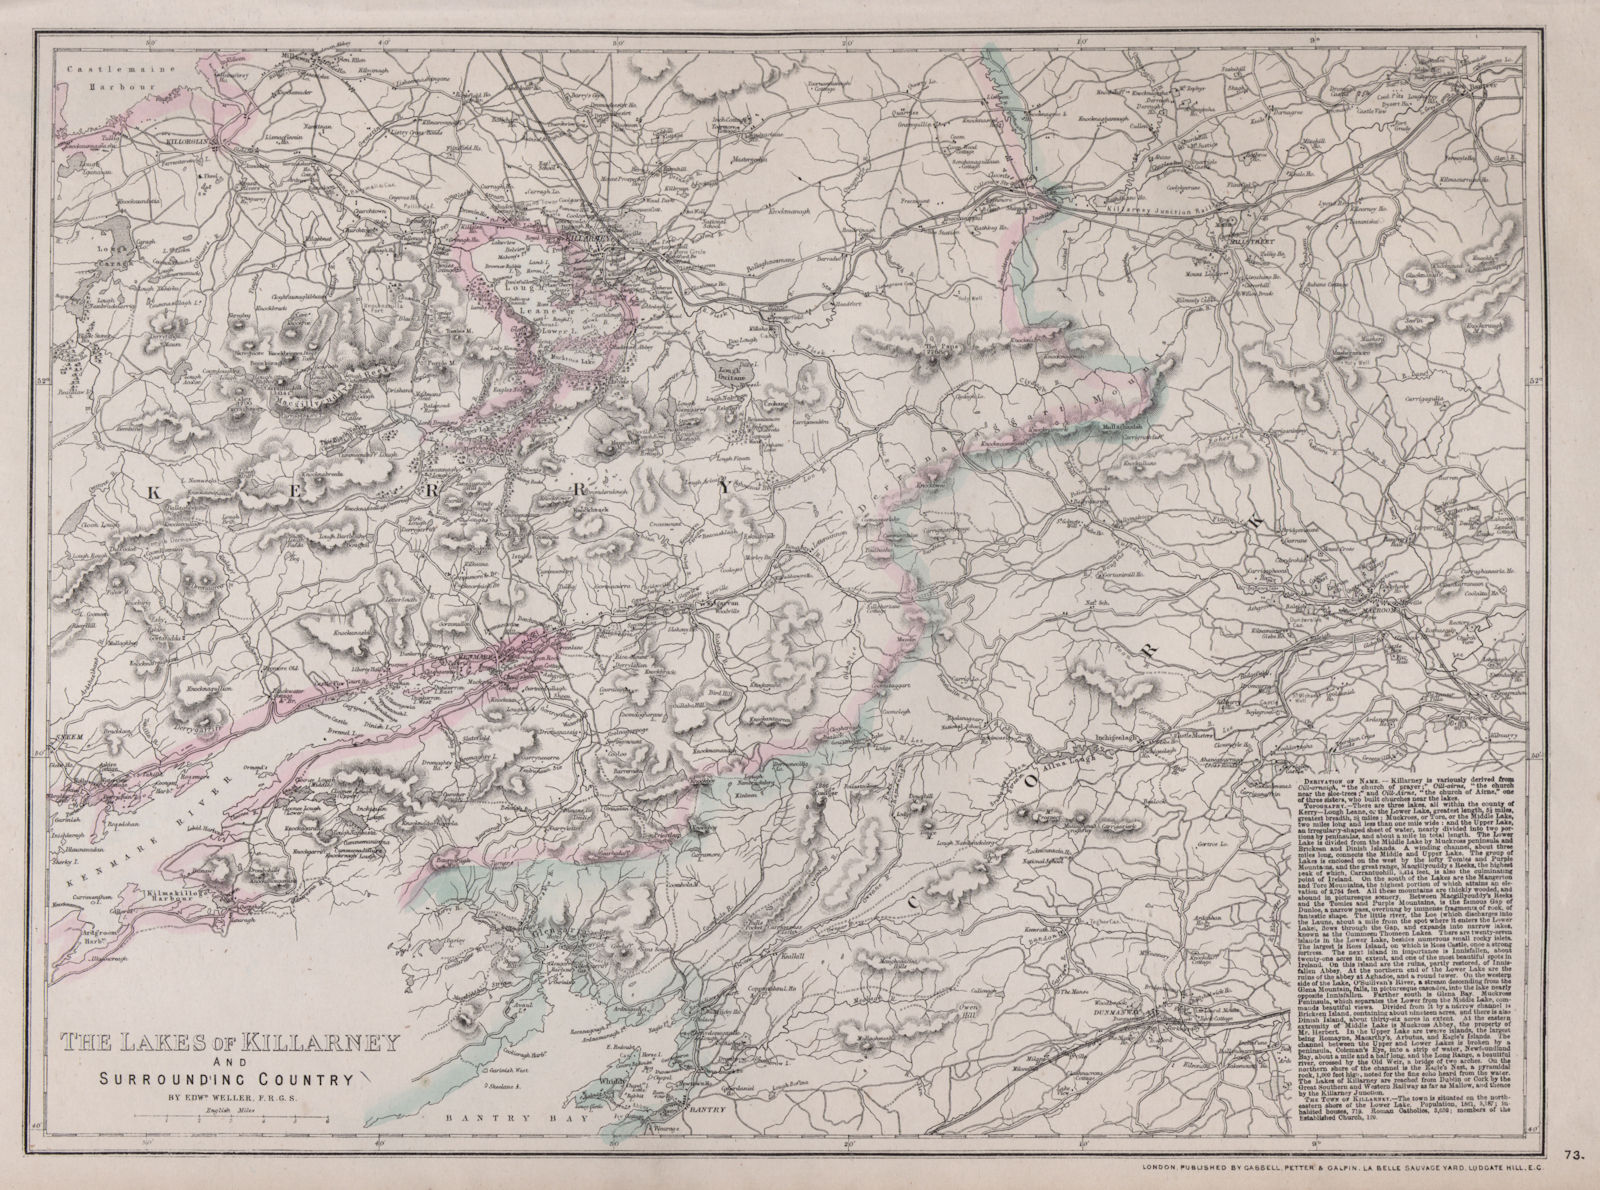 'The Lakes of Killarney & surrounding Country' Kenmare Ireland. WELLER 1868 map